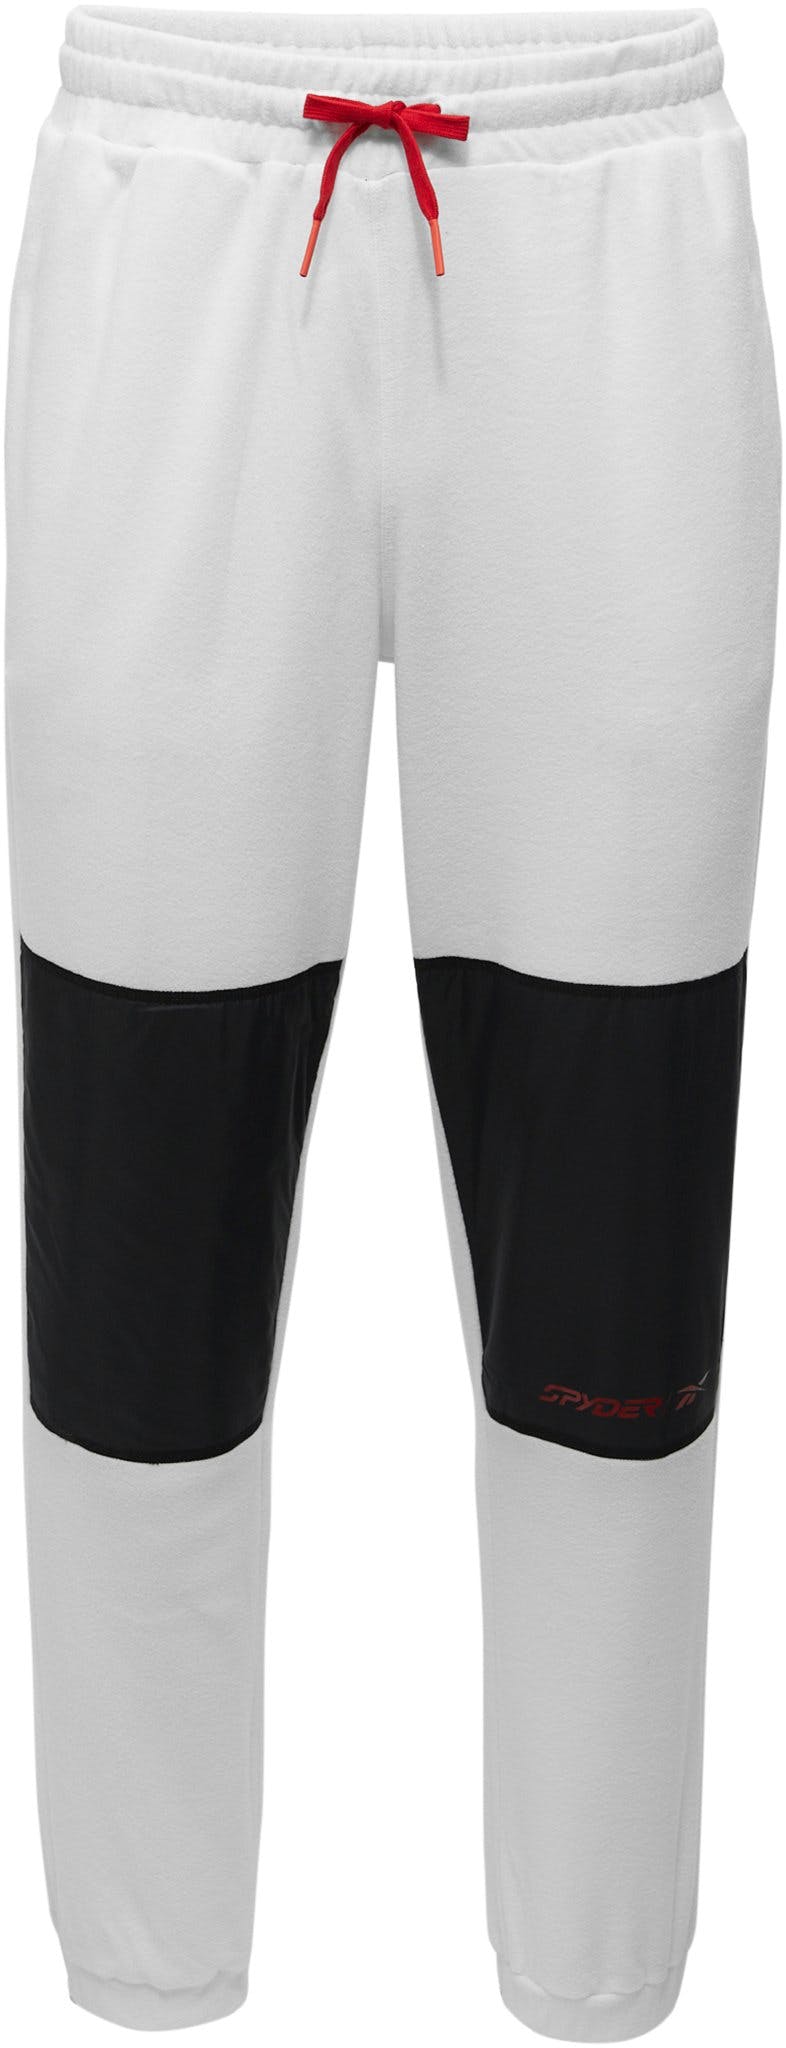 Product image for Lounge Pants - Men's